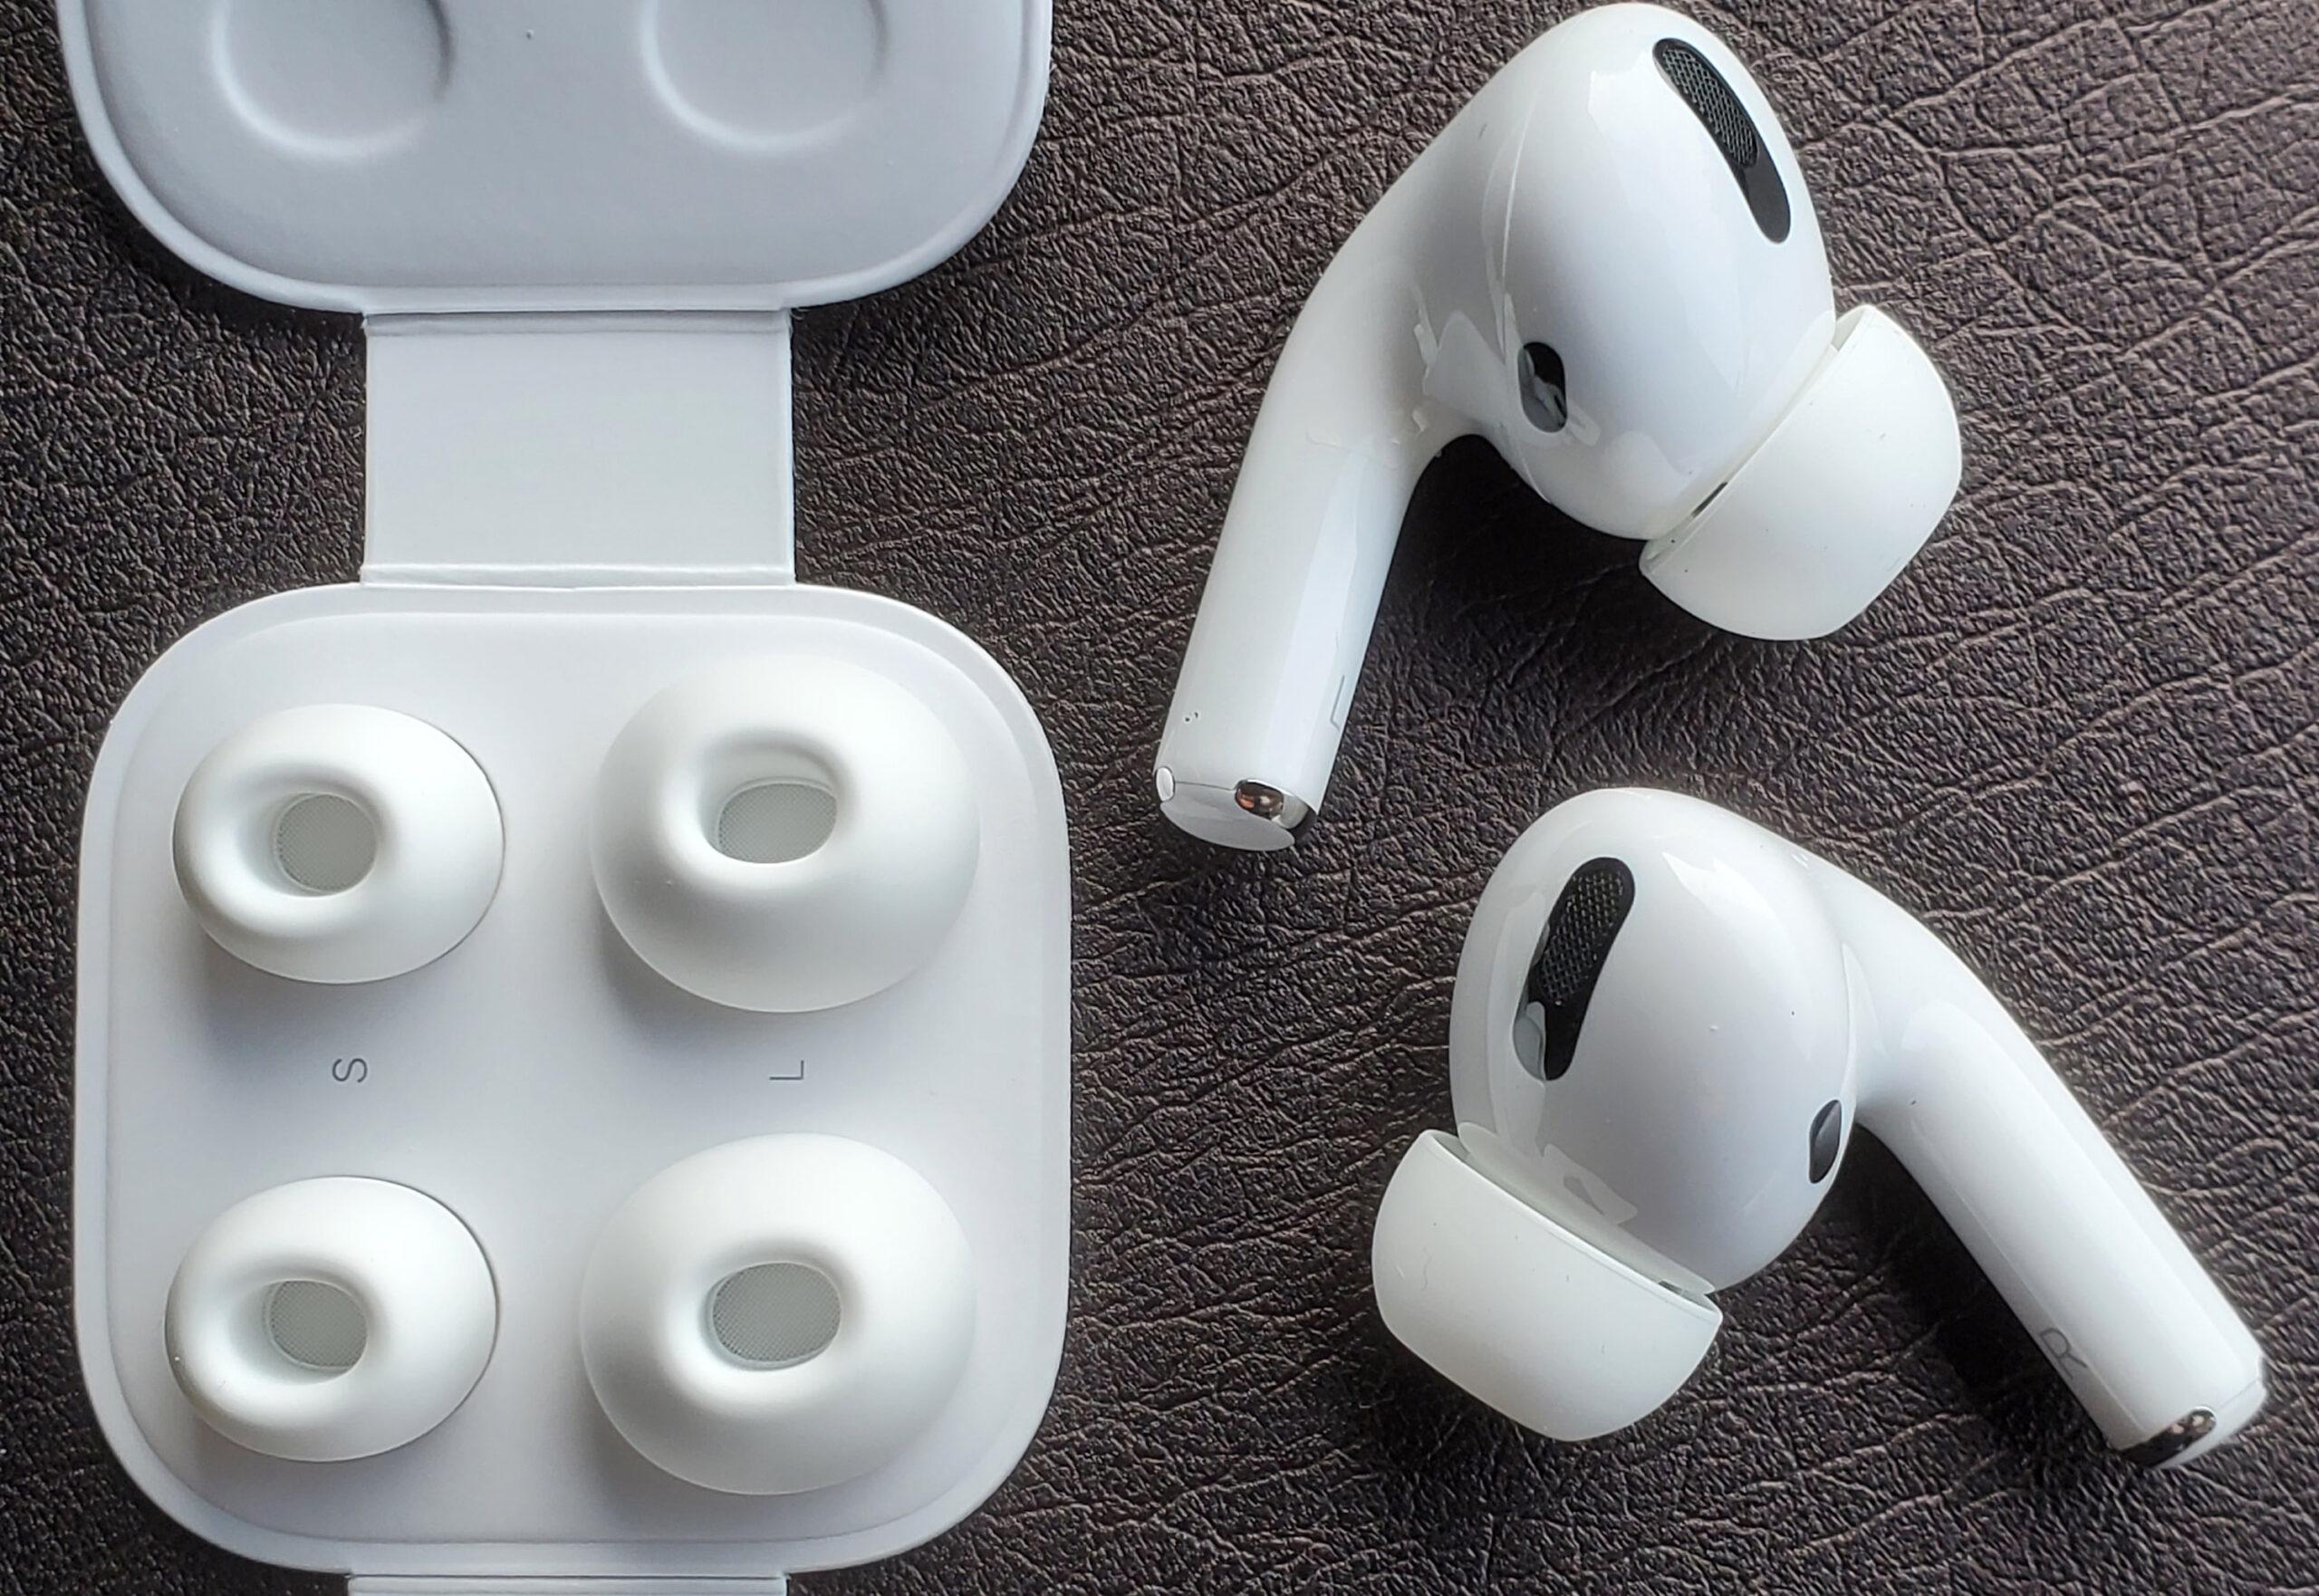 Even combining Bose and Harman's annual revenues barely breaks even with Apple's successful true wireless earbuds line. 167e6702 airpods pro scaled